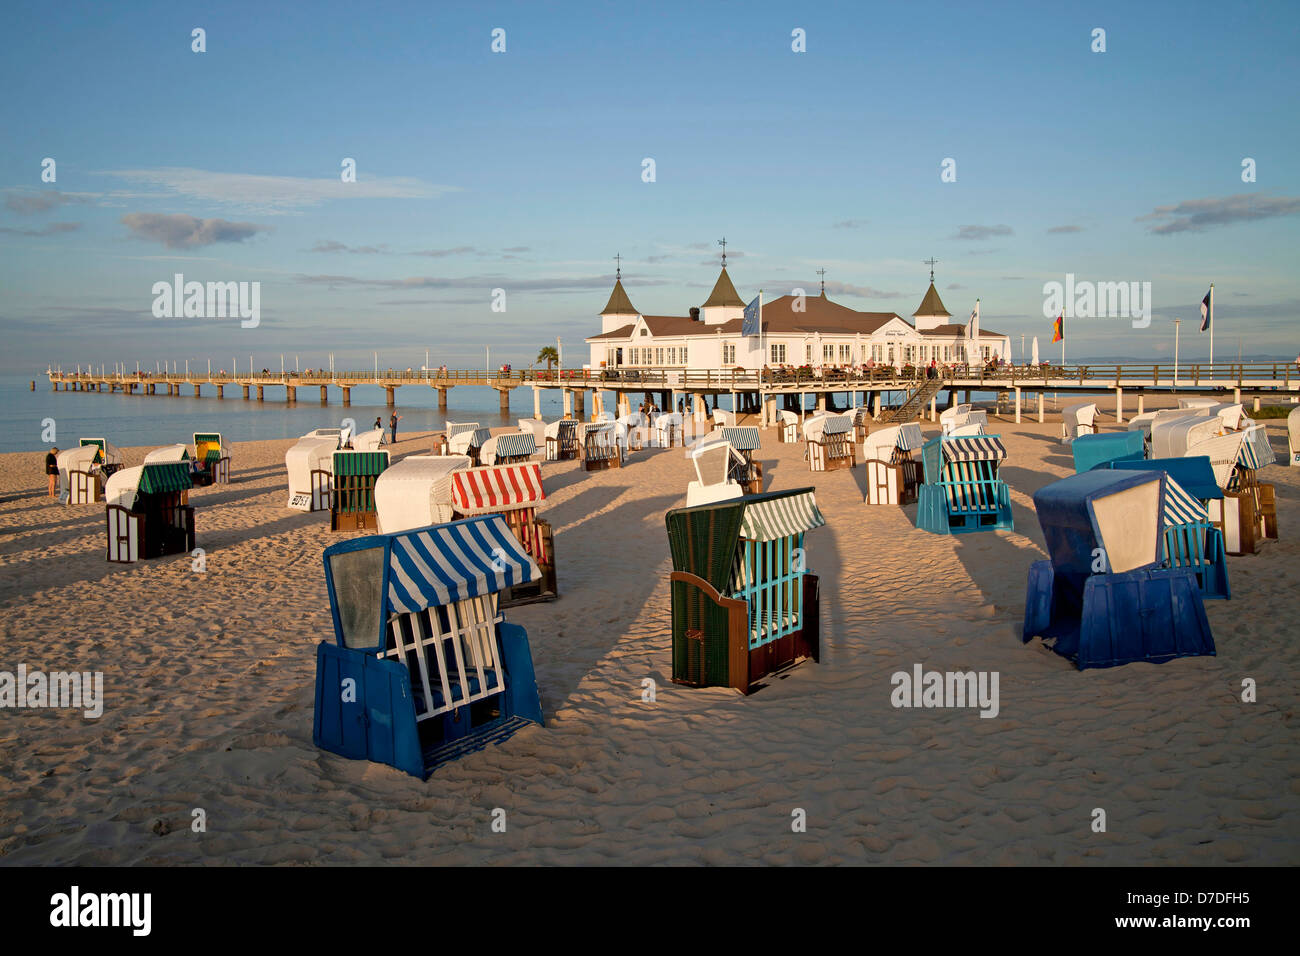 Beach chairs ' Strandkorb ' and the Seebruecke or Pier at the baltic beach of the seaside resort Ahlbeck, Usedom island, Mecklen Stock Photo